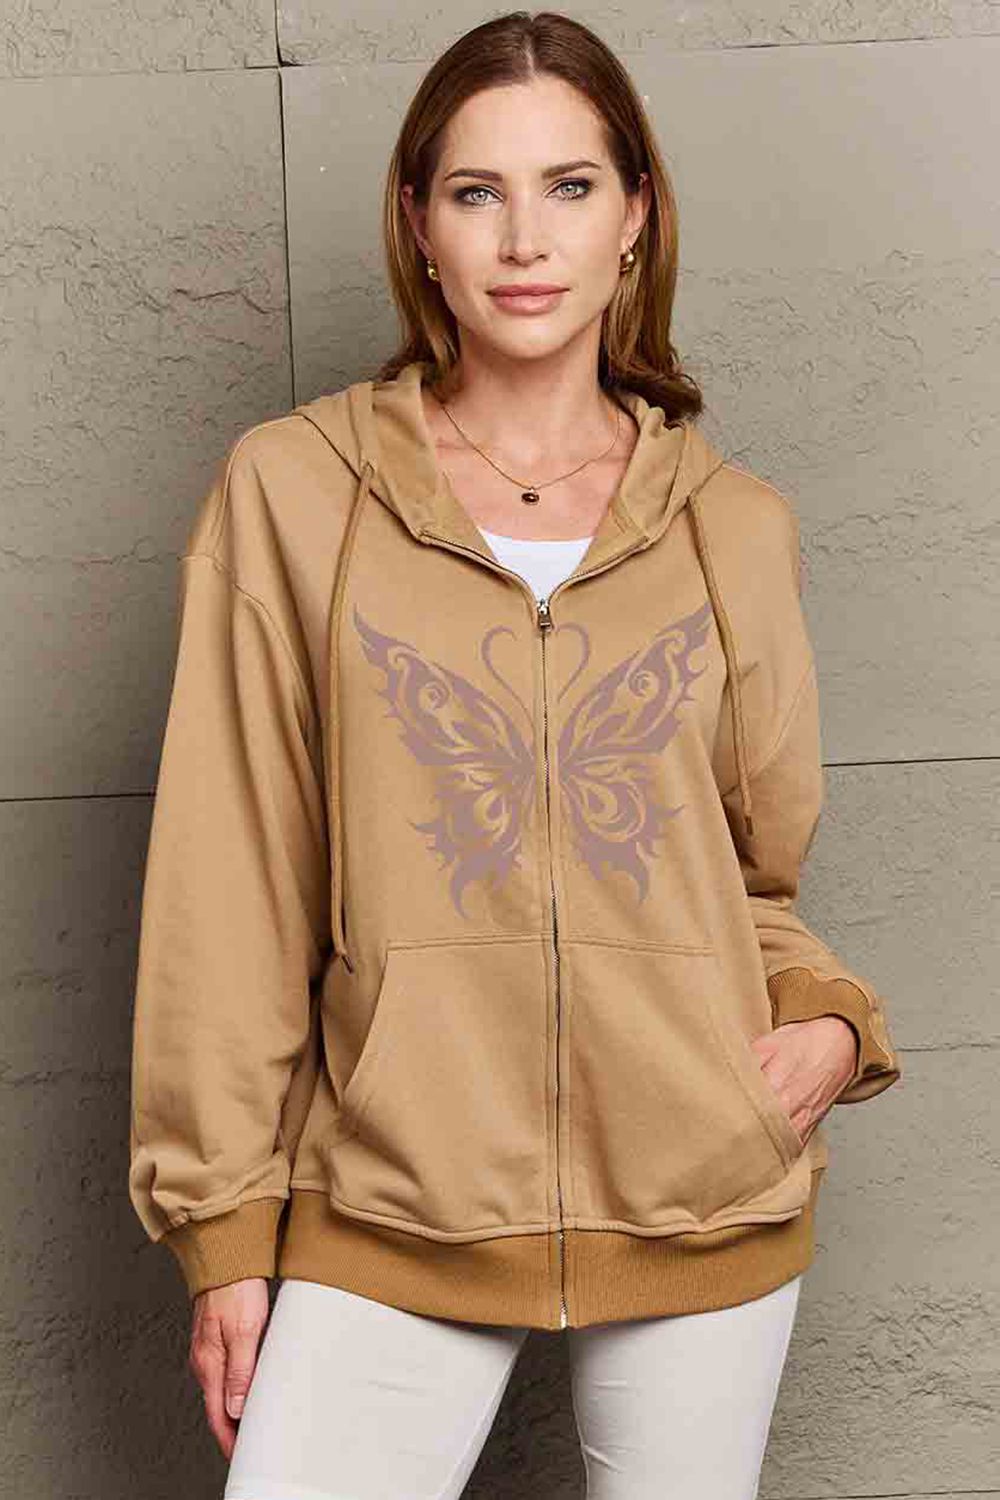 Simply Love Full Size Butterfly Graphic Hoodie Ti Amo I love you